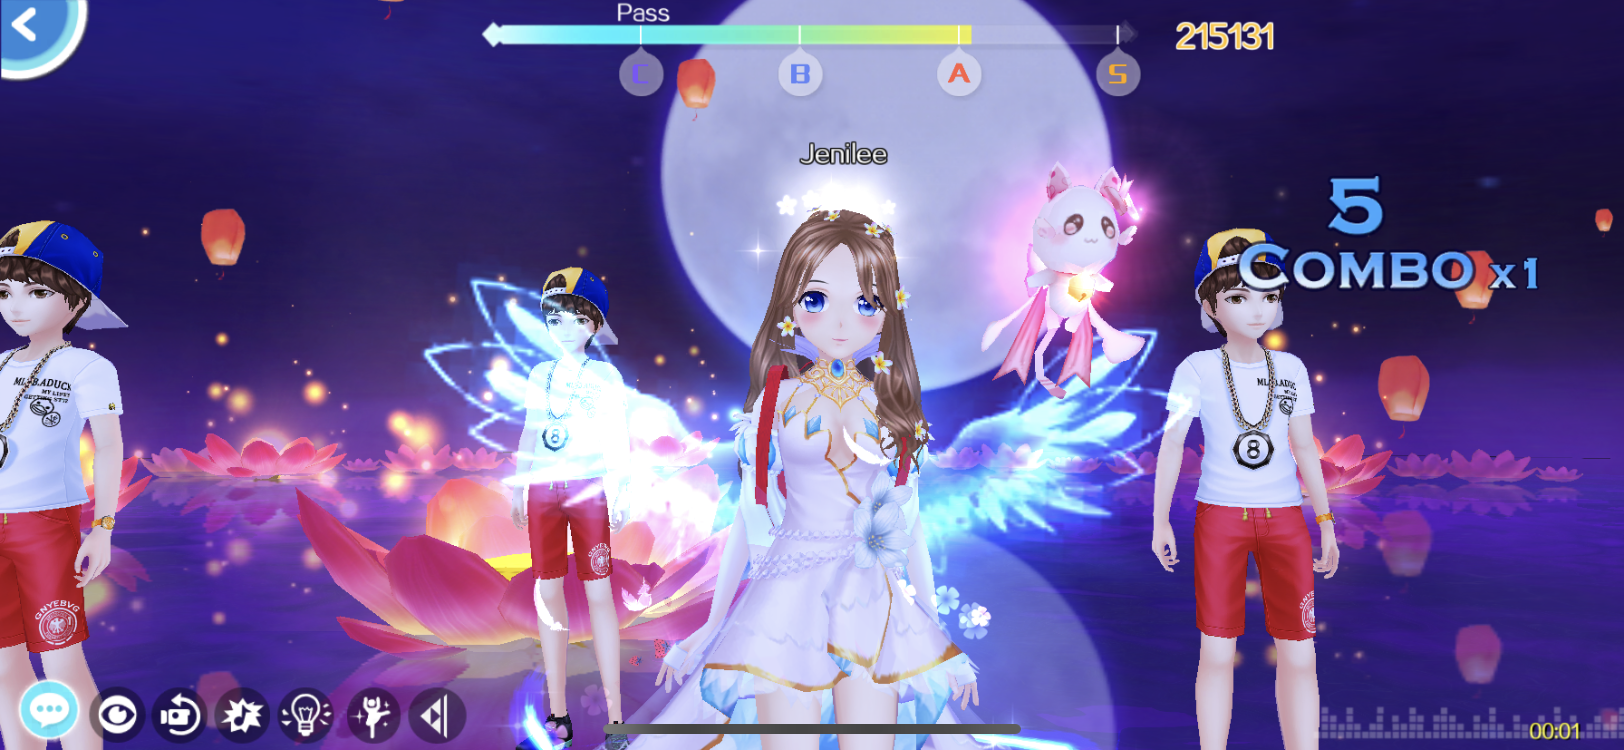 Sweet Dance Online Anime Dressup Mobile Music Dancing Game